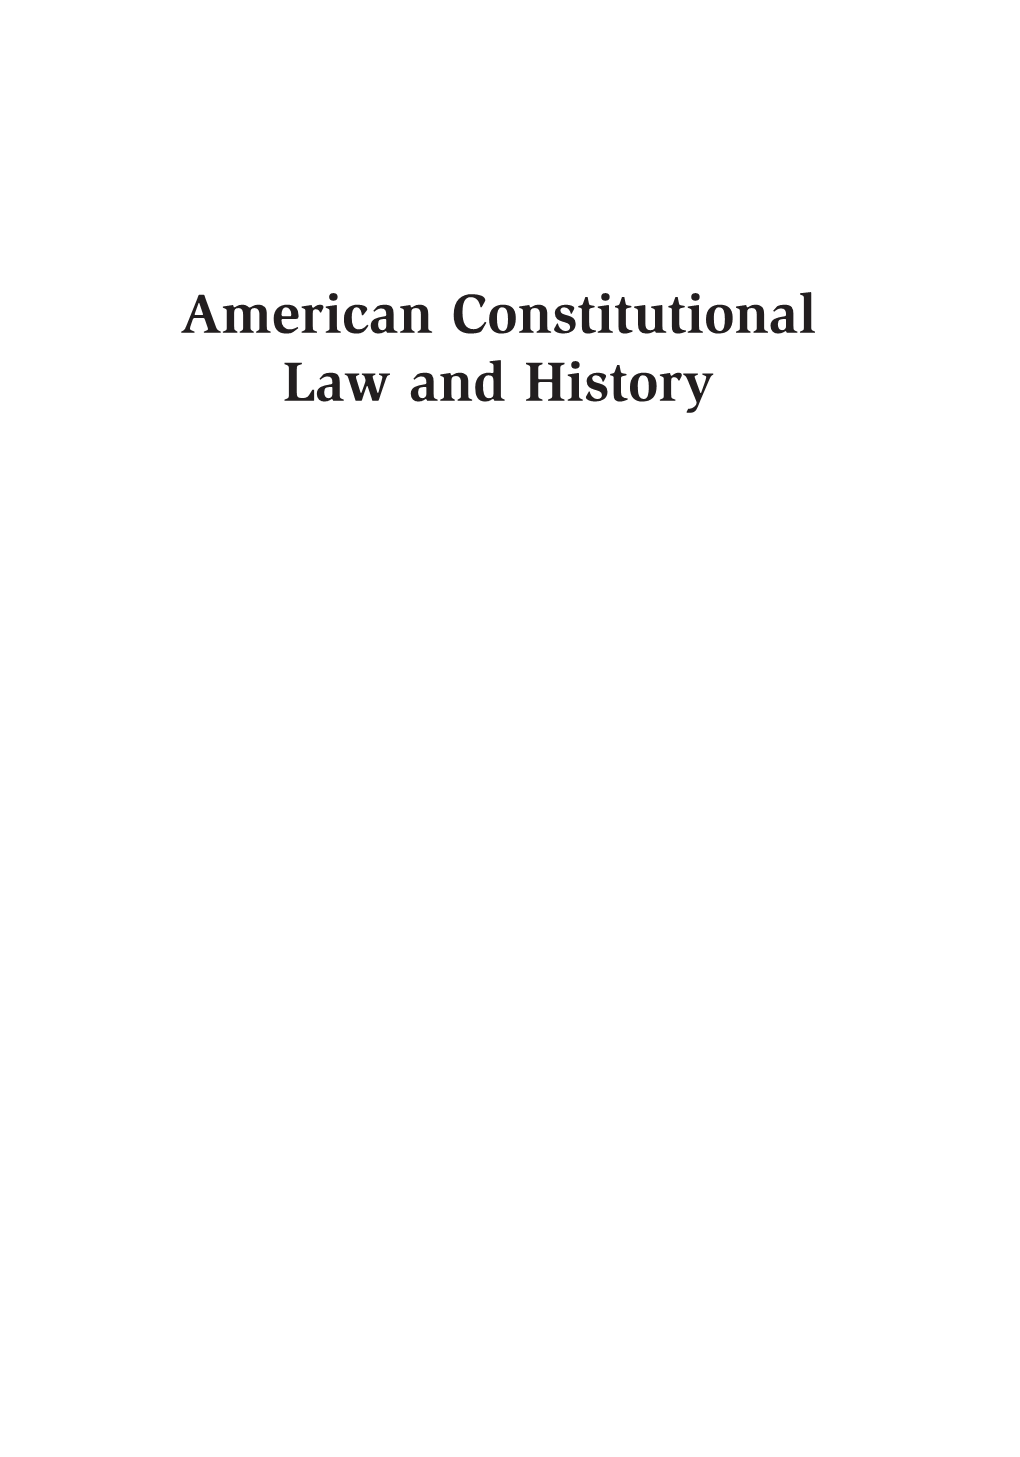 American Constitutional Law and History 00 Ariens ACLH 2E Fmt Auto 9/29/16 1:36 PM Page Ii 00 Ariens ACLH 2E Fmt Auto 9/29/16 1:36 PM Page Iii